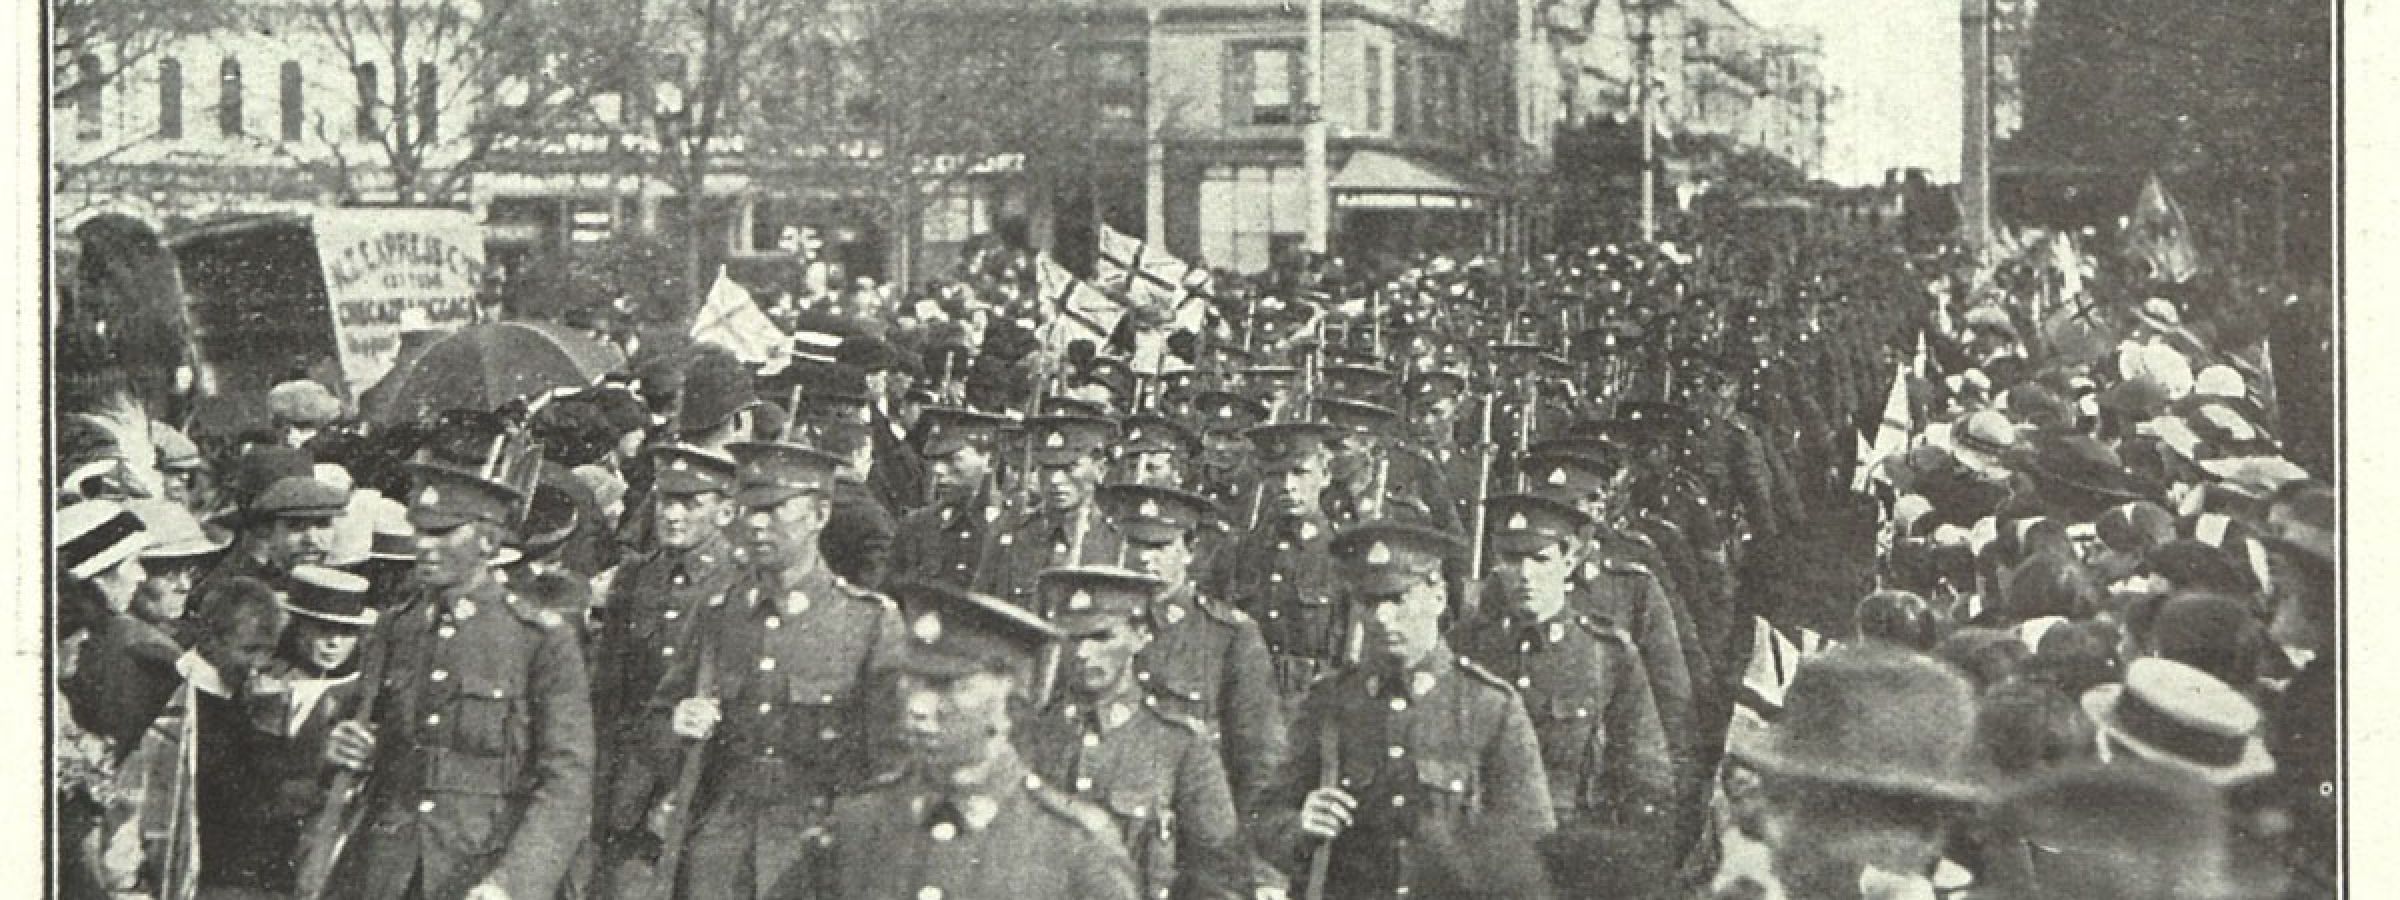 Otago troops marching with Union Jacks flying in the crowd